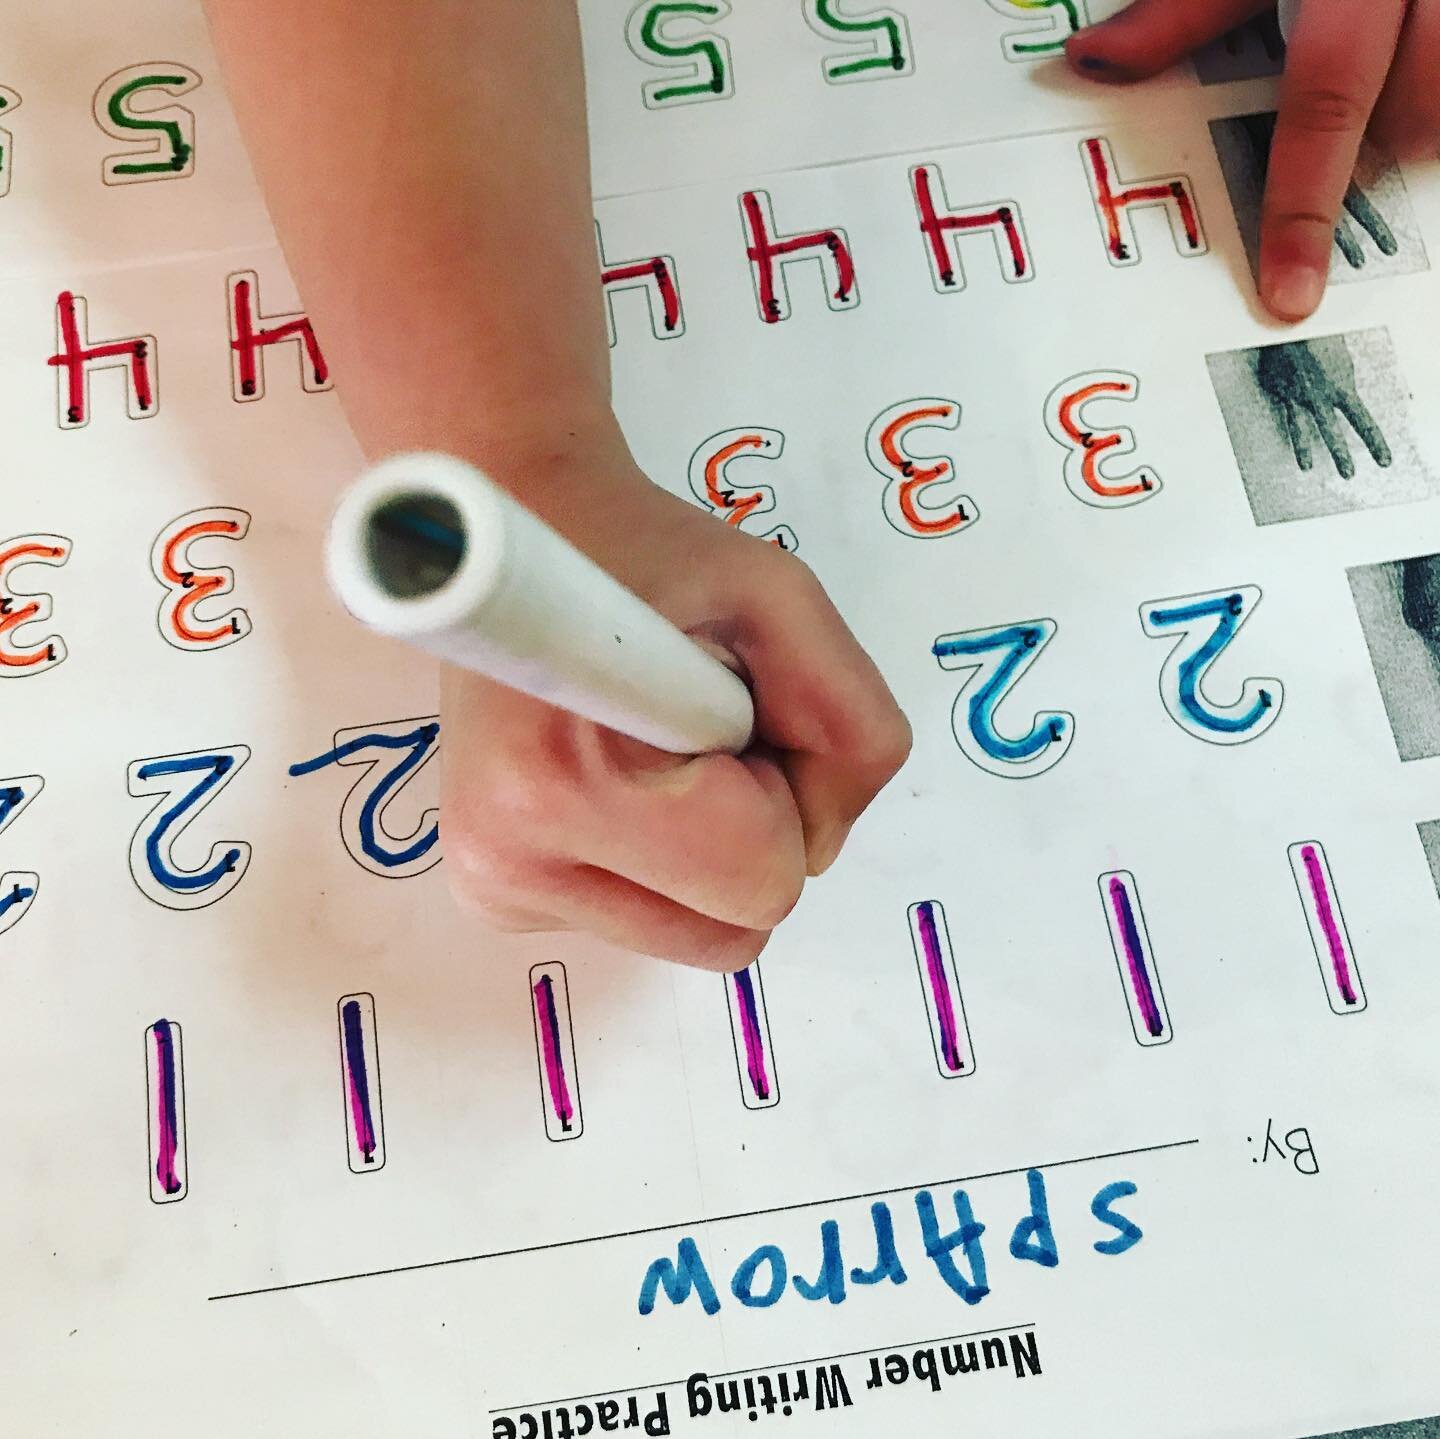 This number formation activity is one of the most effective way I&rsquo;ve found to ACTUALLY help kids write numbers correctly.
🌻
PRO TIP- Have them use *special* color changing markers so they WANT to go over every number a second time!
🌻
You can 